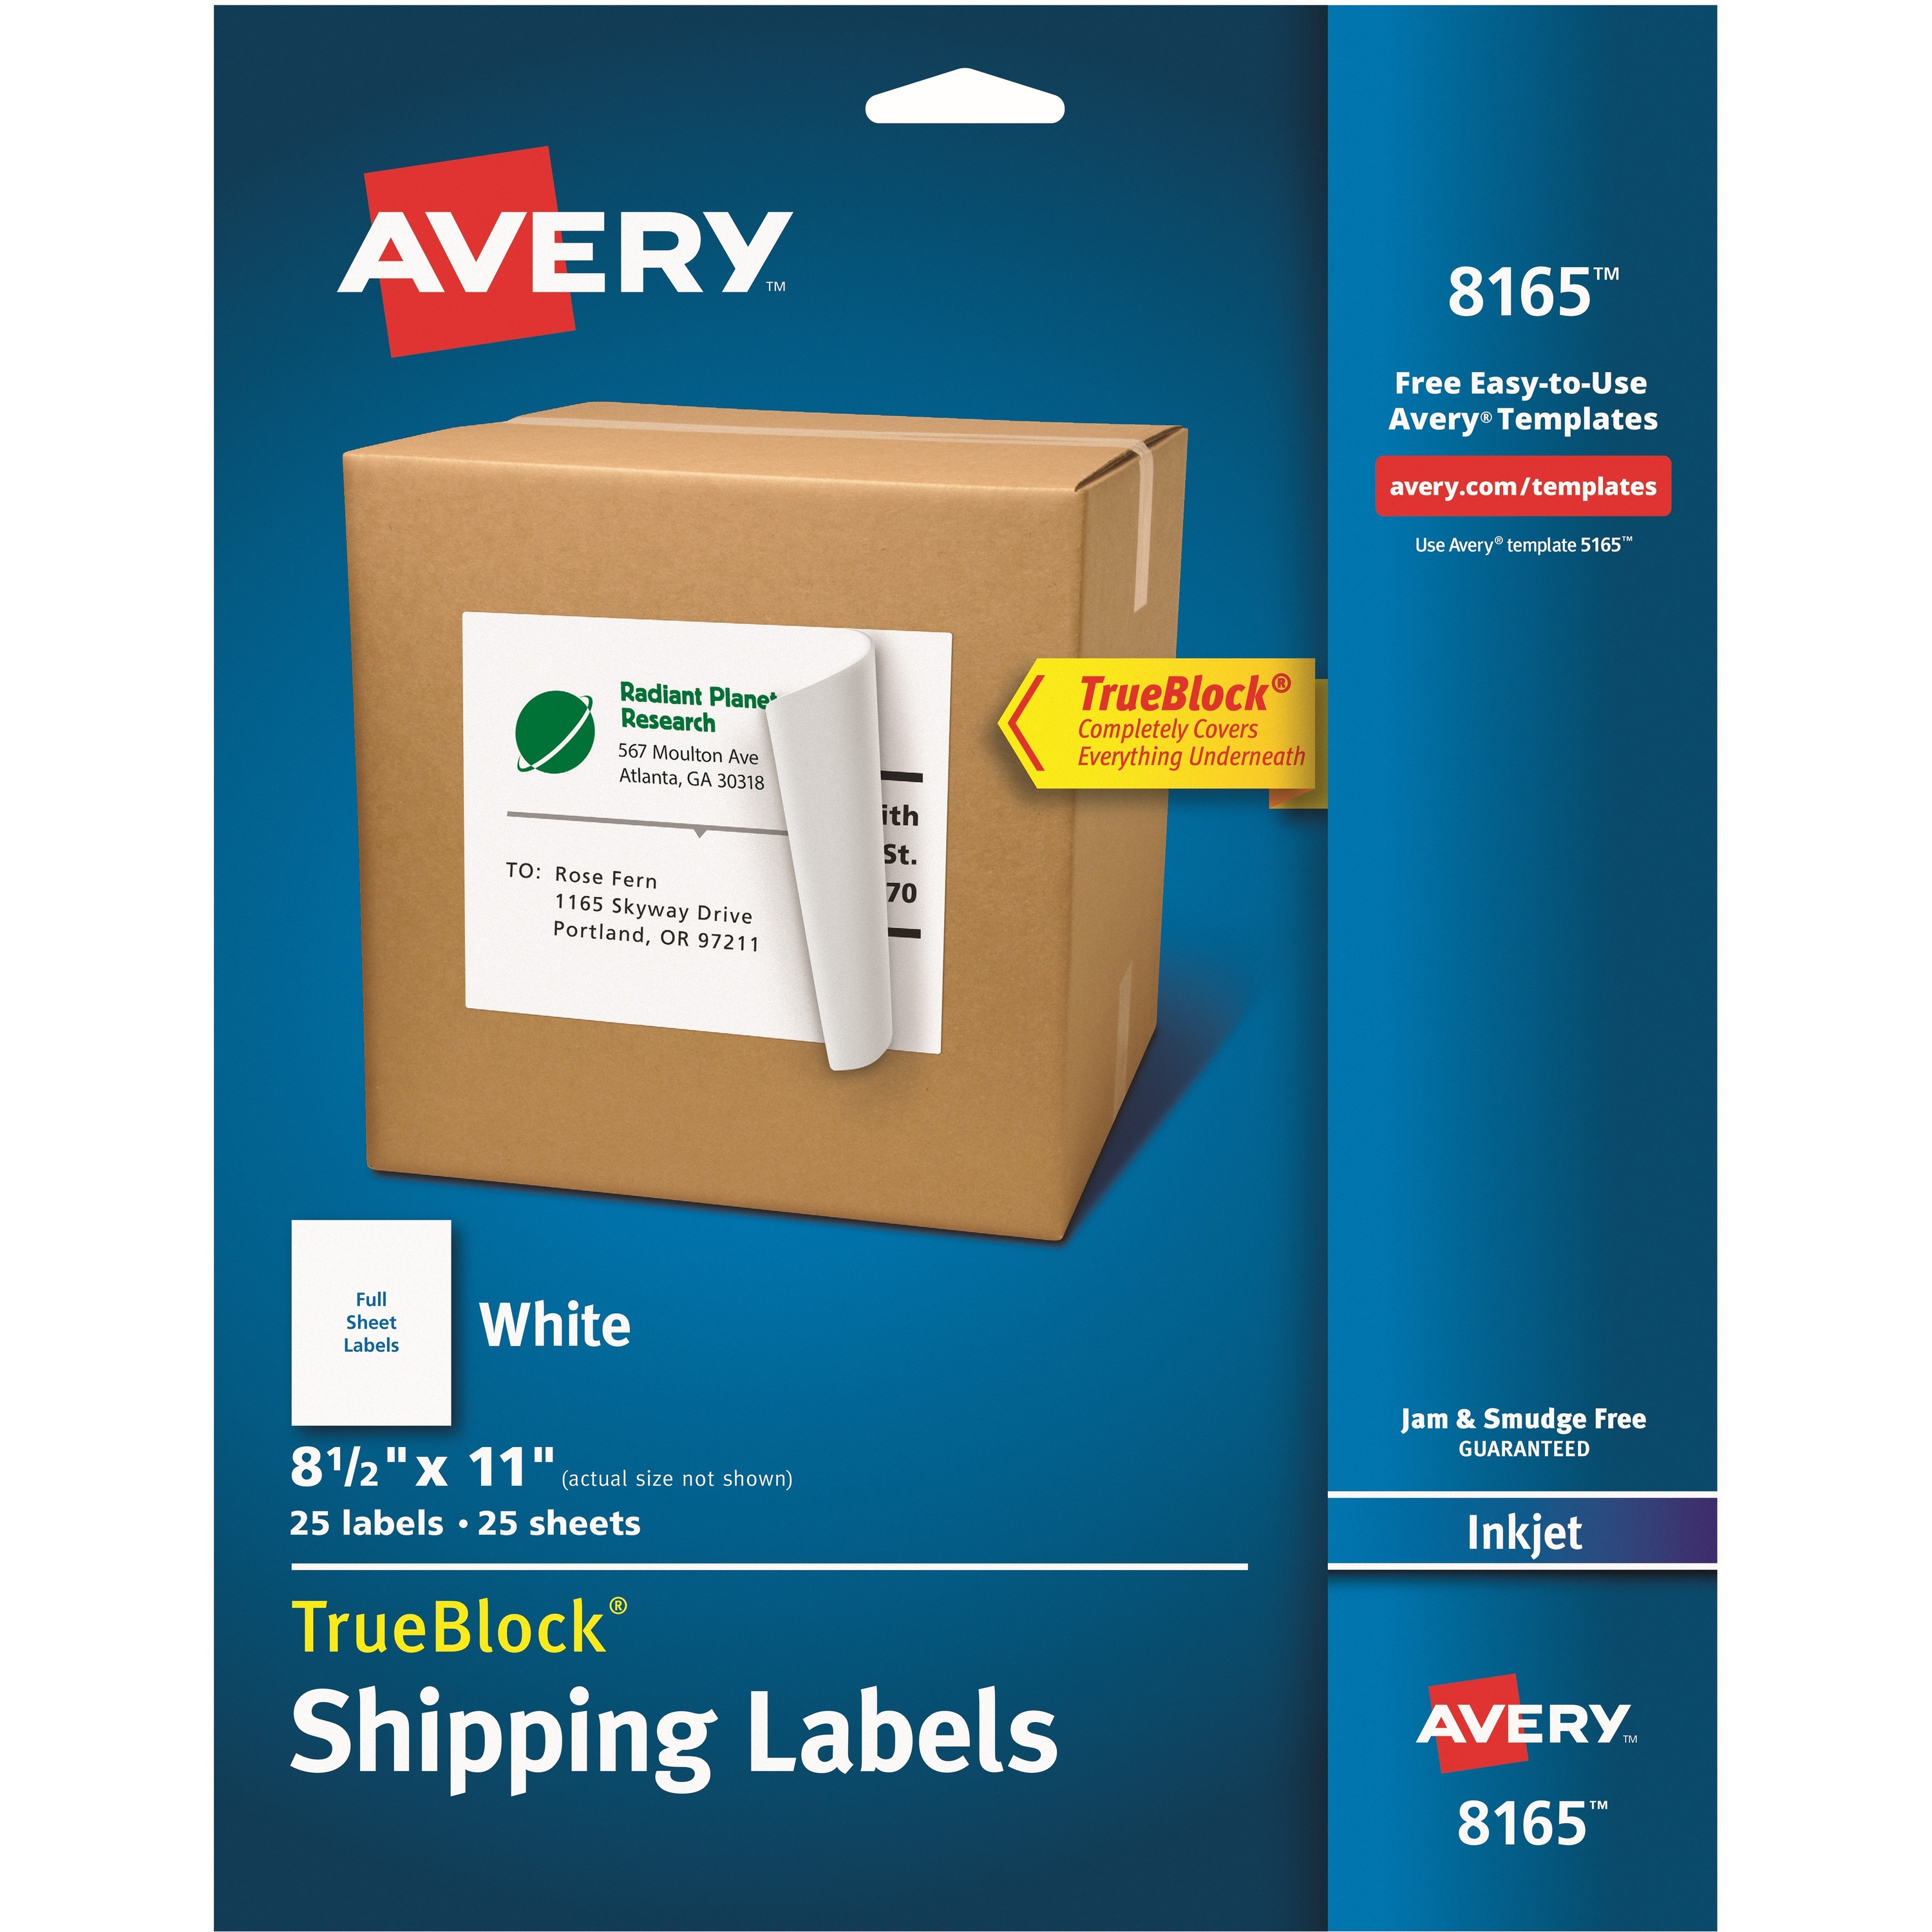 avery-mailing-label-madill-the-office-company